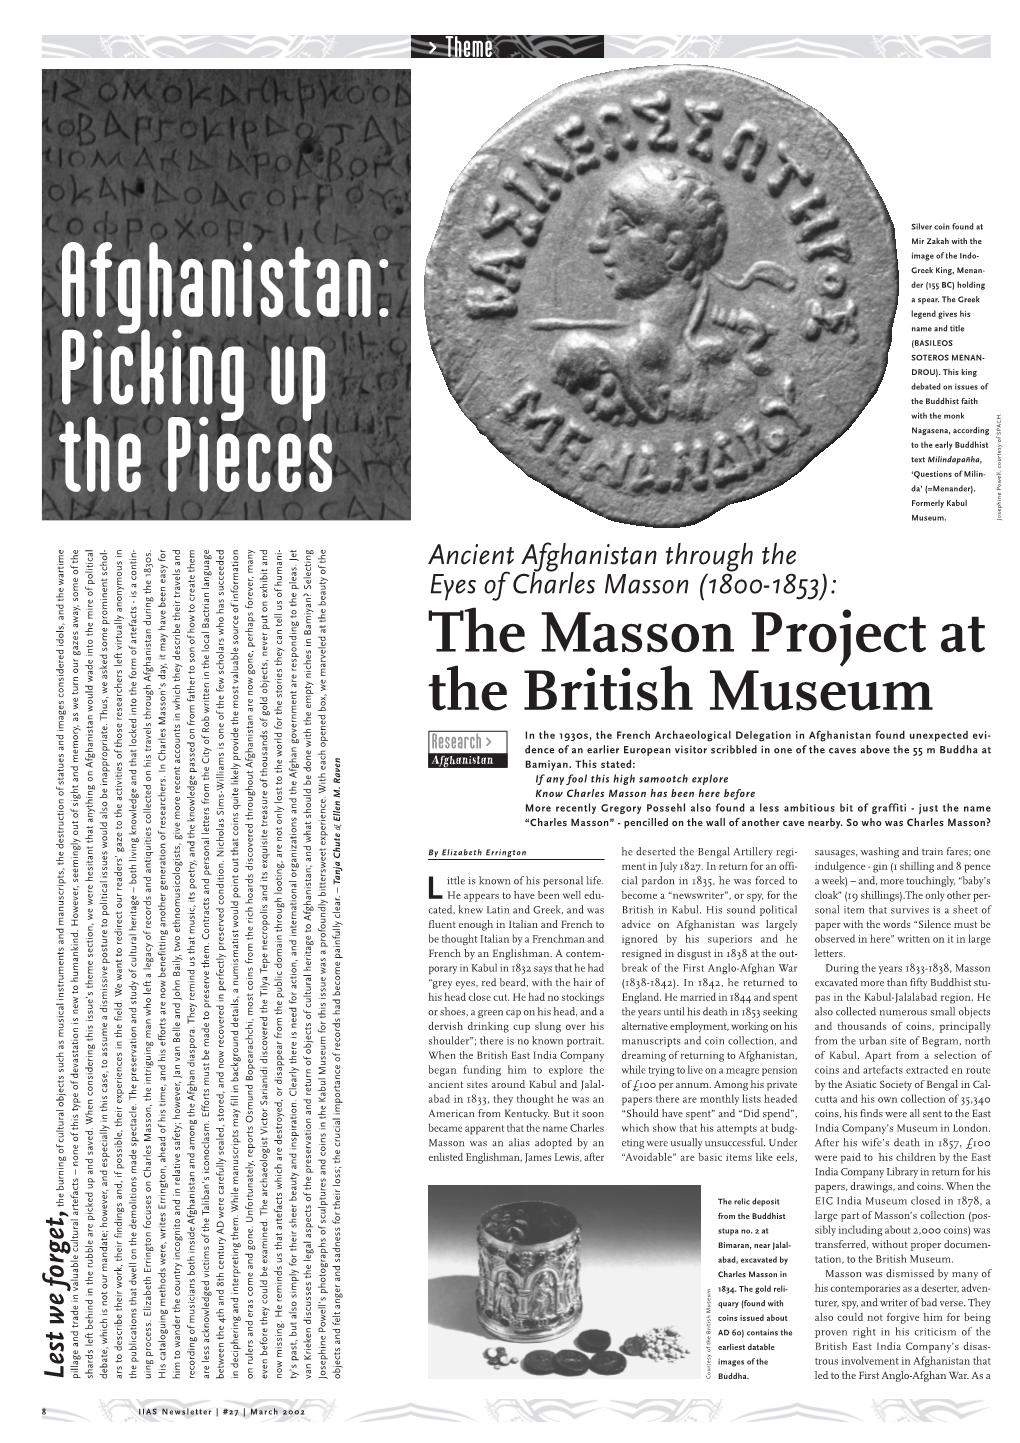 The Masson Project at the British Museum